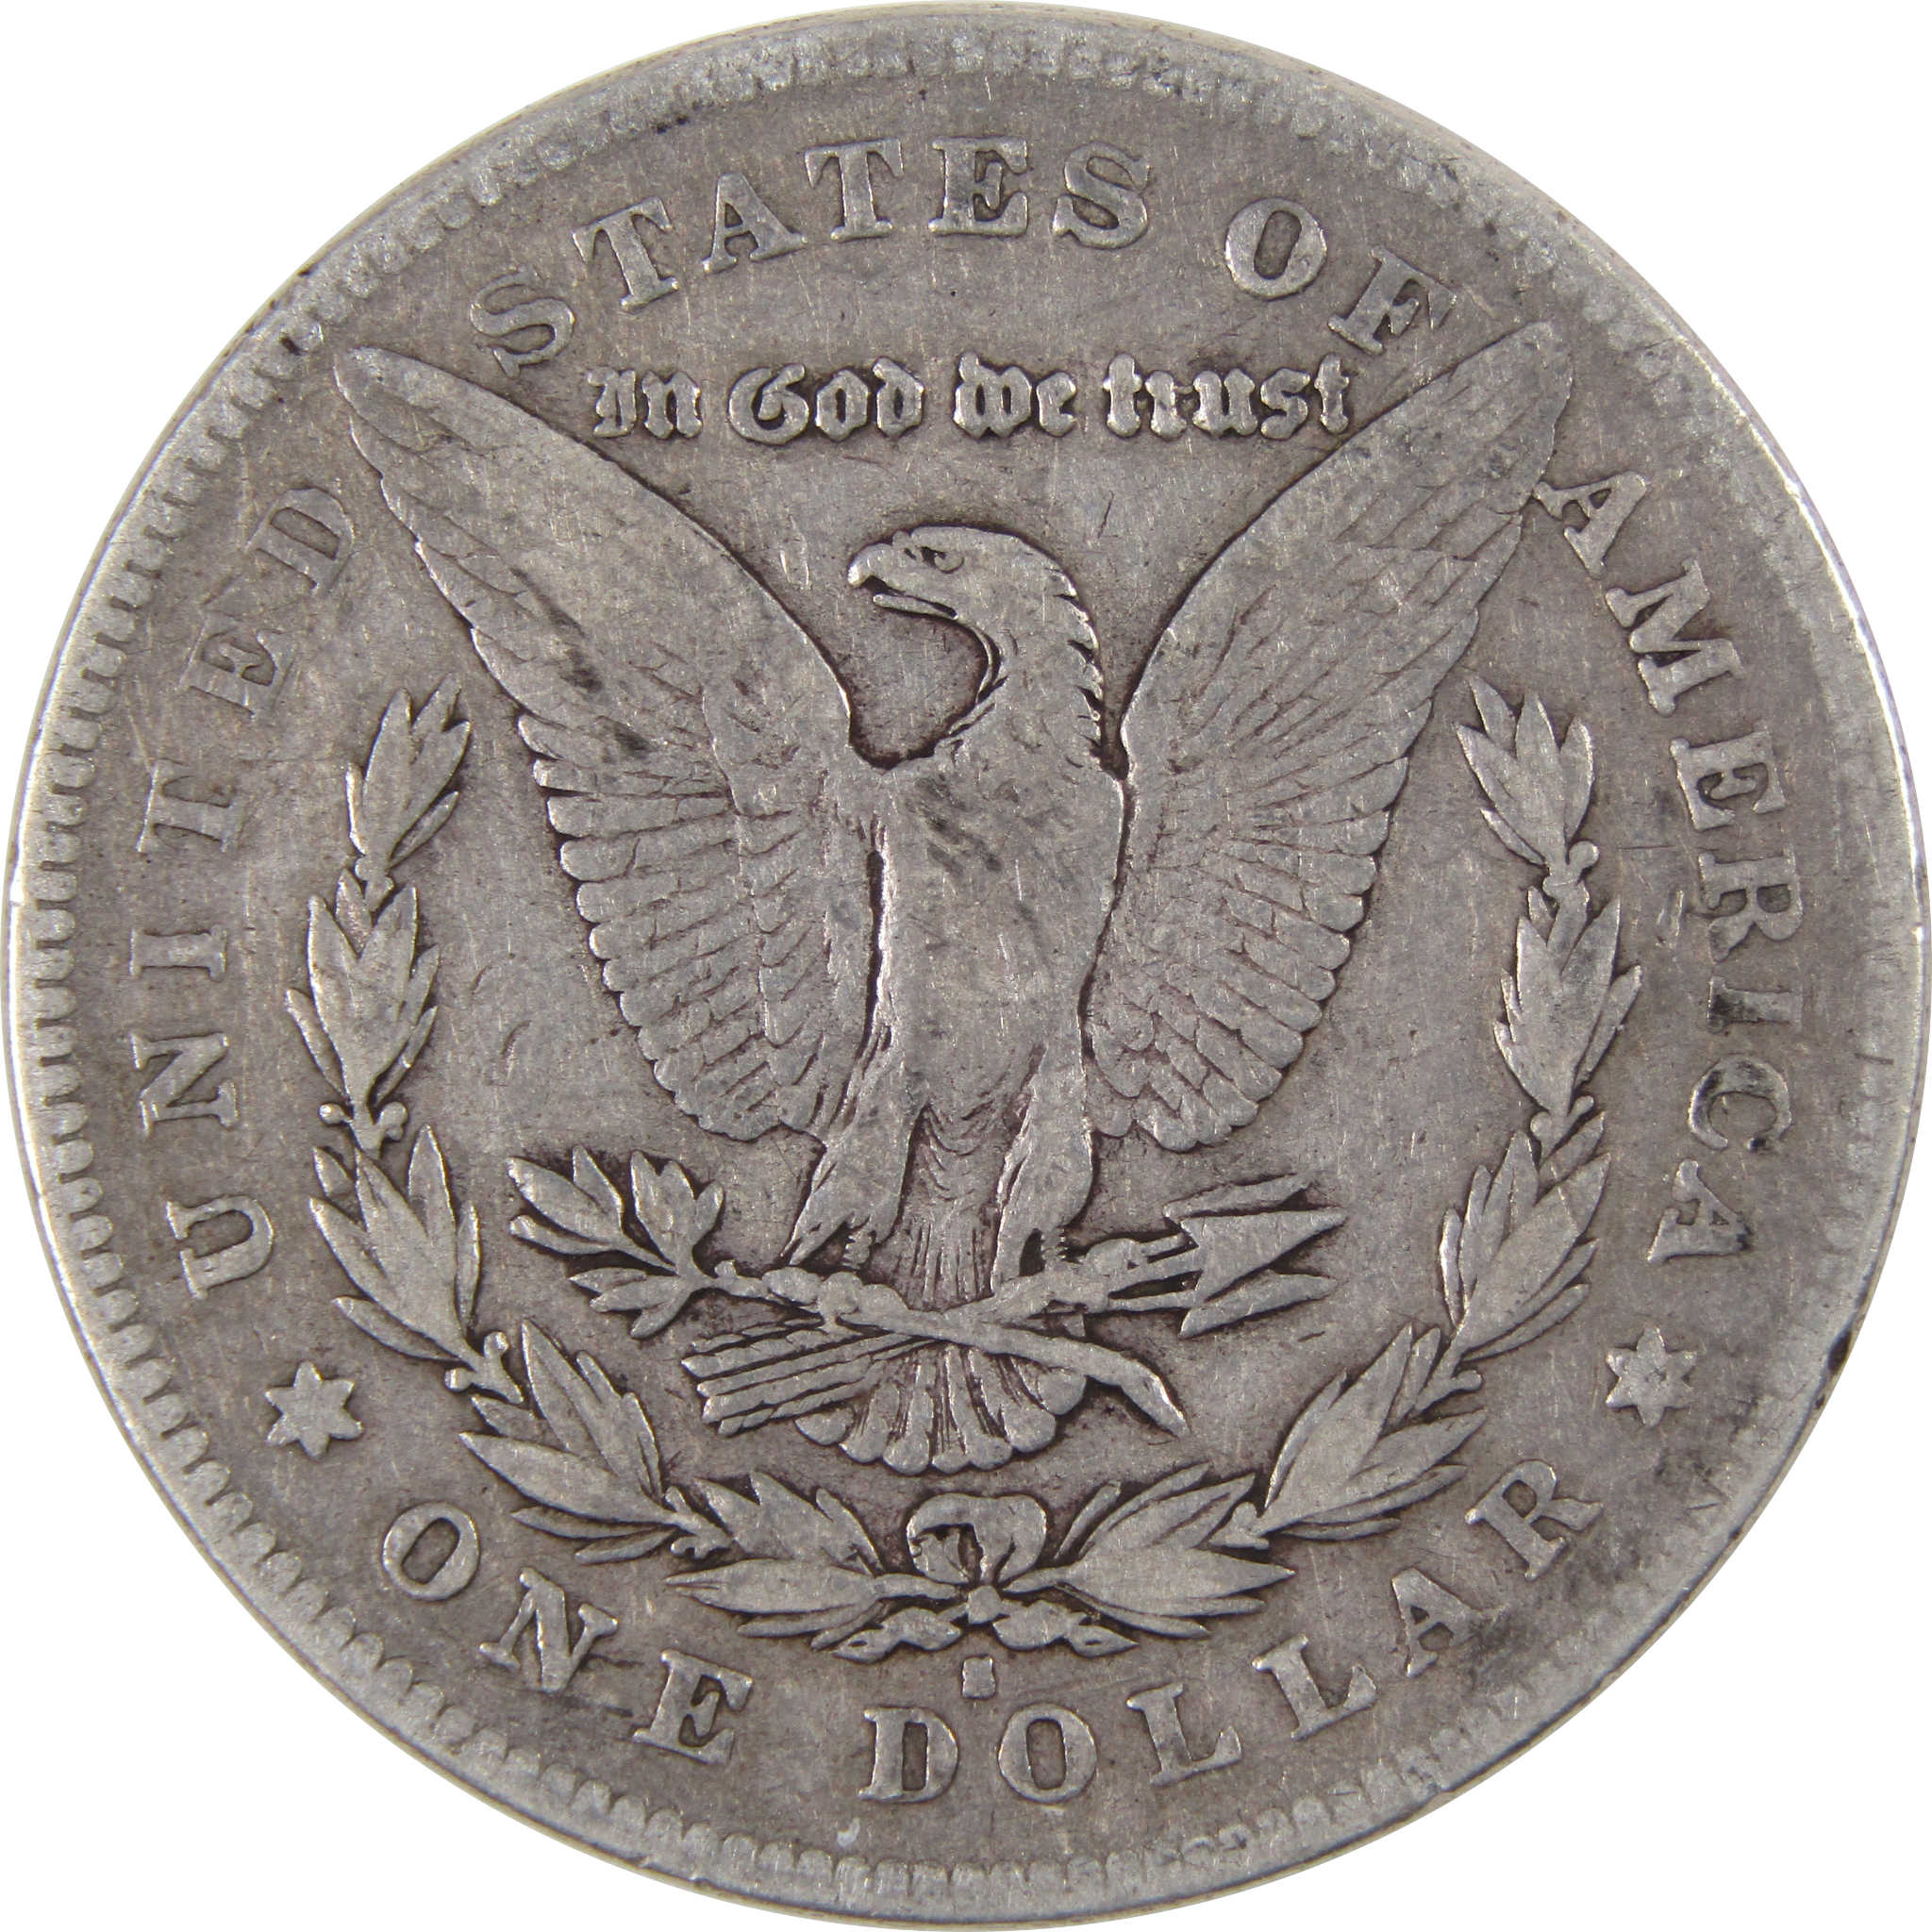 1879 S Rev 78 Morgan Dollar VG Very Good Details 90% Silver SKU:I2748 - Morgan coin - Morgan silver dollar - Morgan silver dollar for sale - Profile Coins &amp; Collectibles